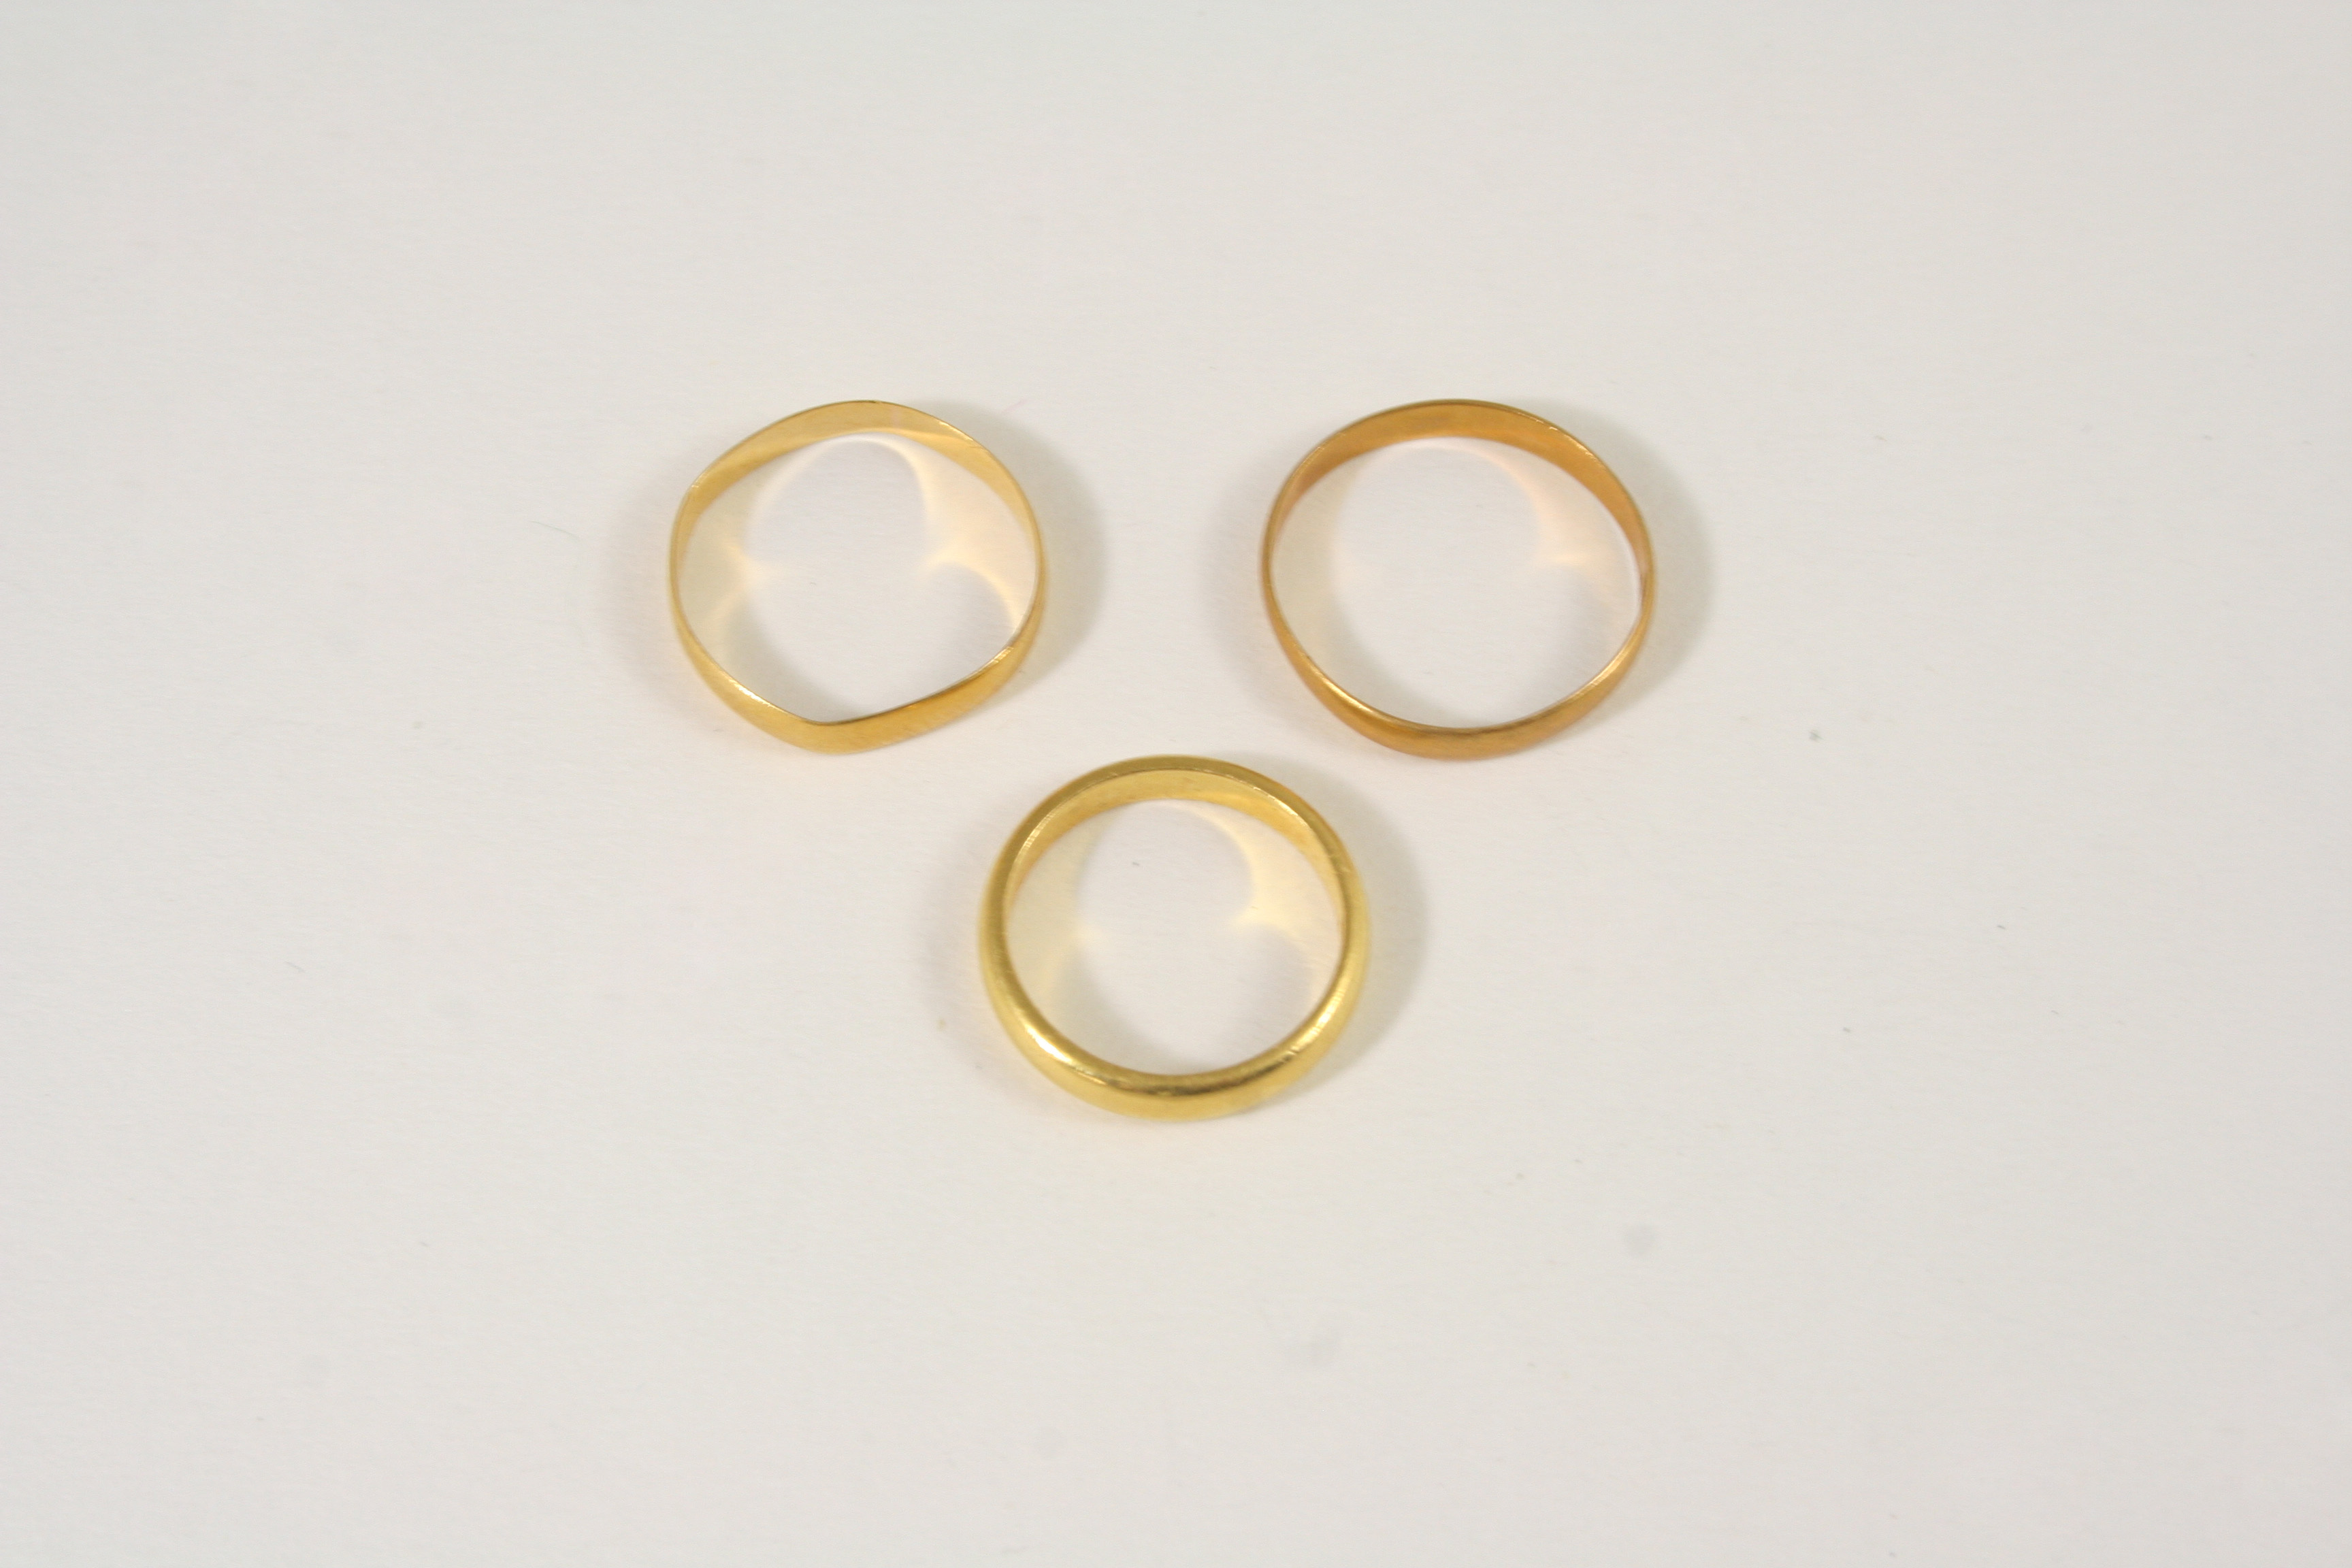 THREE 22CT. GOLD WEDDING BANDS total weight 7.2 grams.